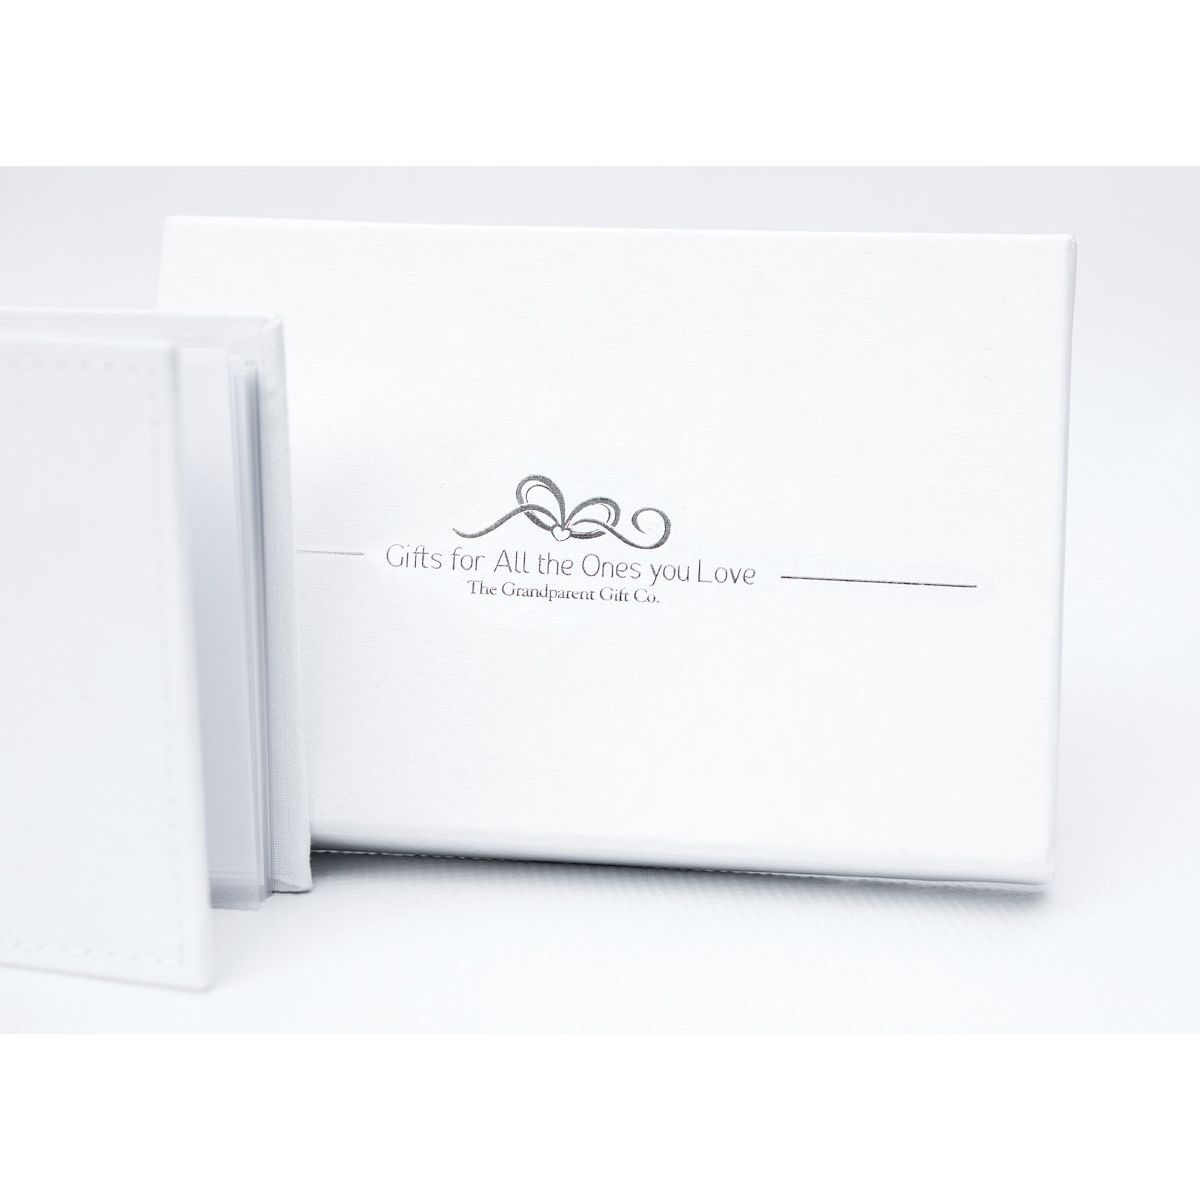 High quality white box with linen finish.